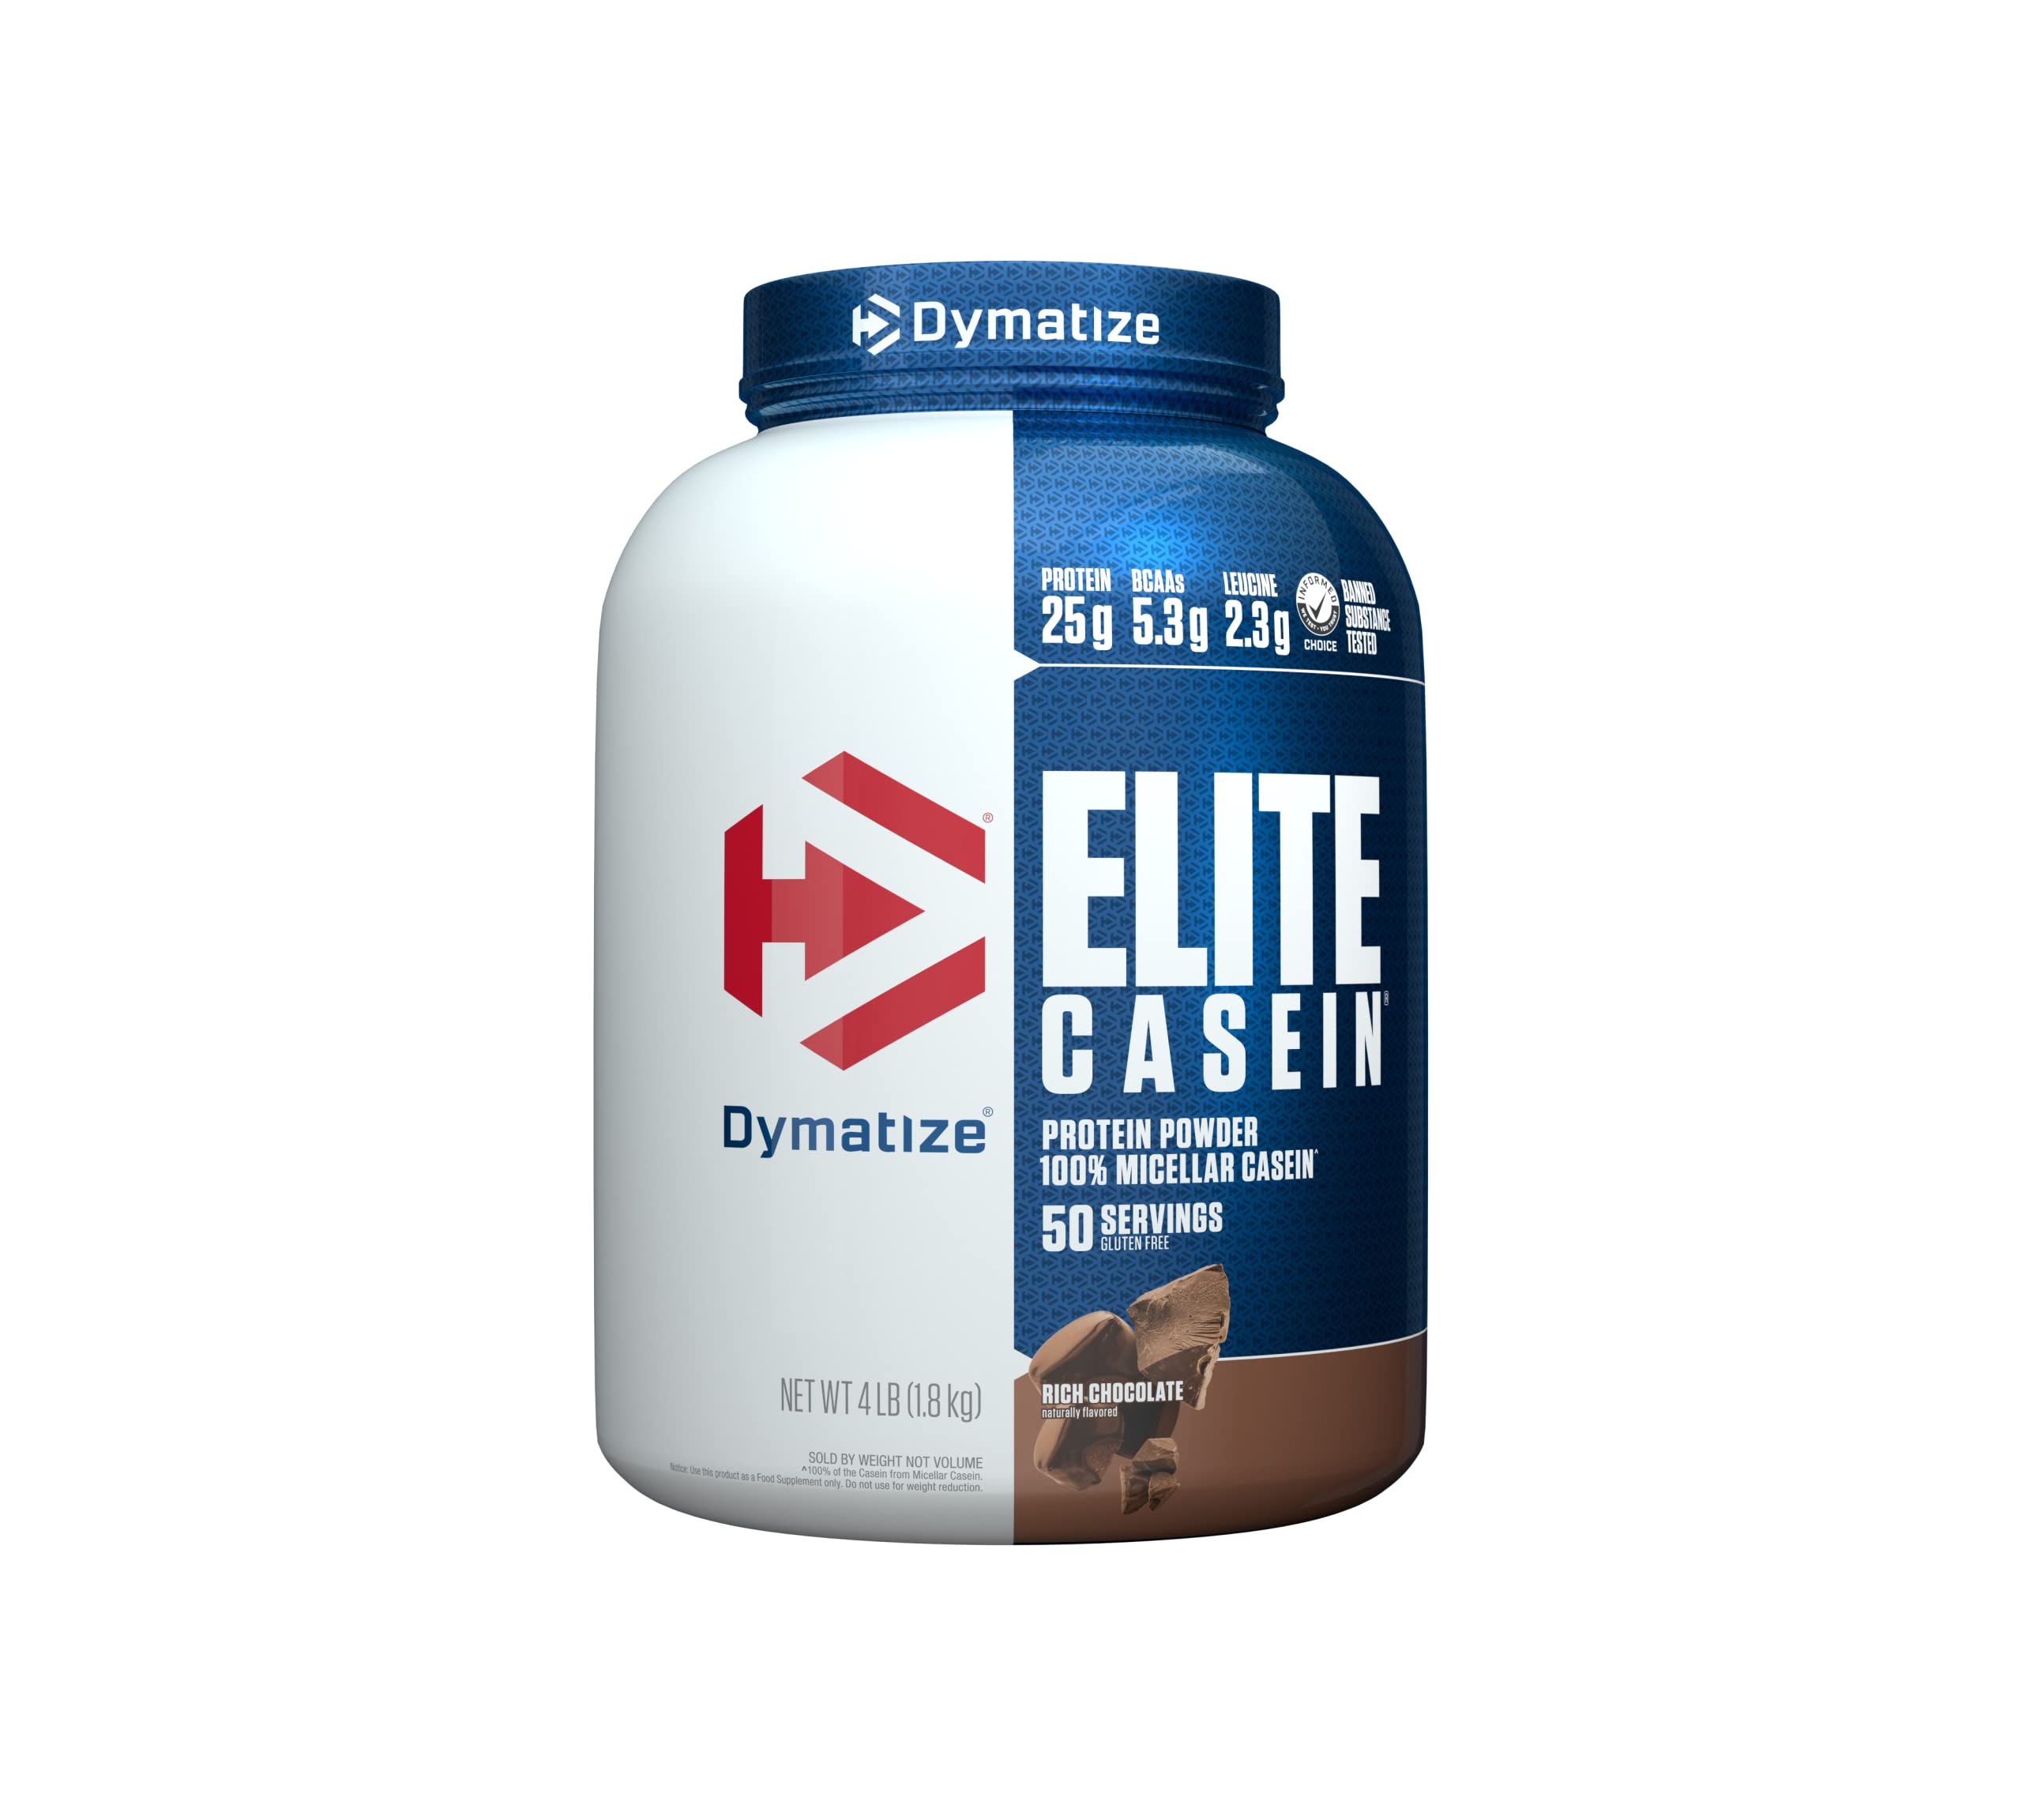 Dymatize Elite Casein Protein Powder, Slow Absorbing with Muscle Building Amino Acids, 100% Micellar Casein, 25g Protein, 5.4g BCAAs & 2.3g Leucine, Helps Overnight Recovery, Rich Chocolate, 4 Pound